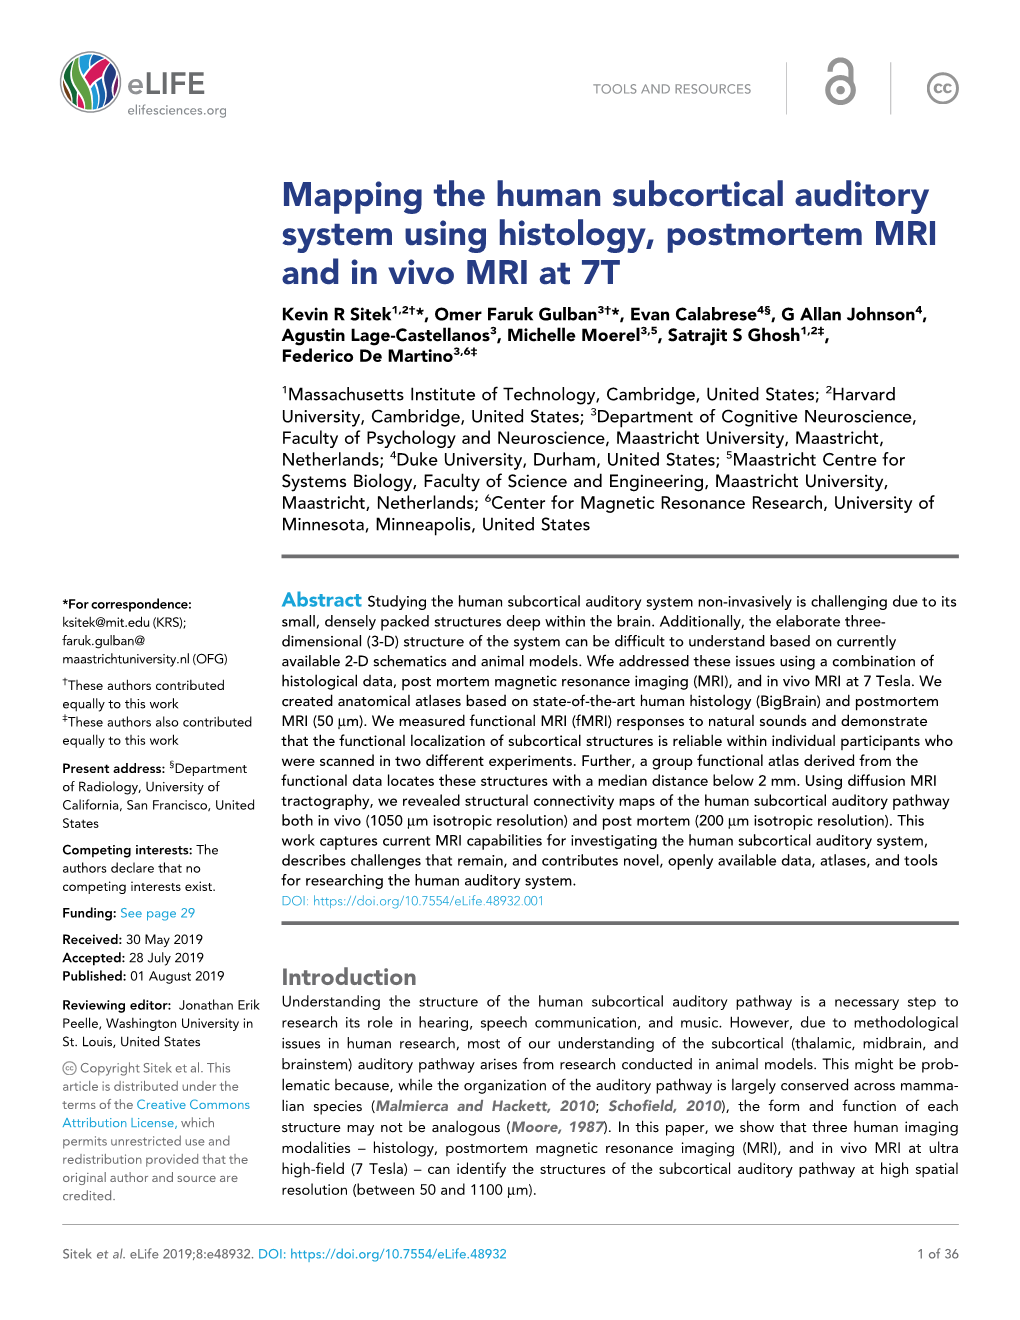 Mapping the Human Subcortical Auditory System Using Histology